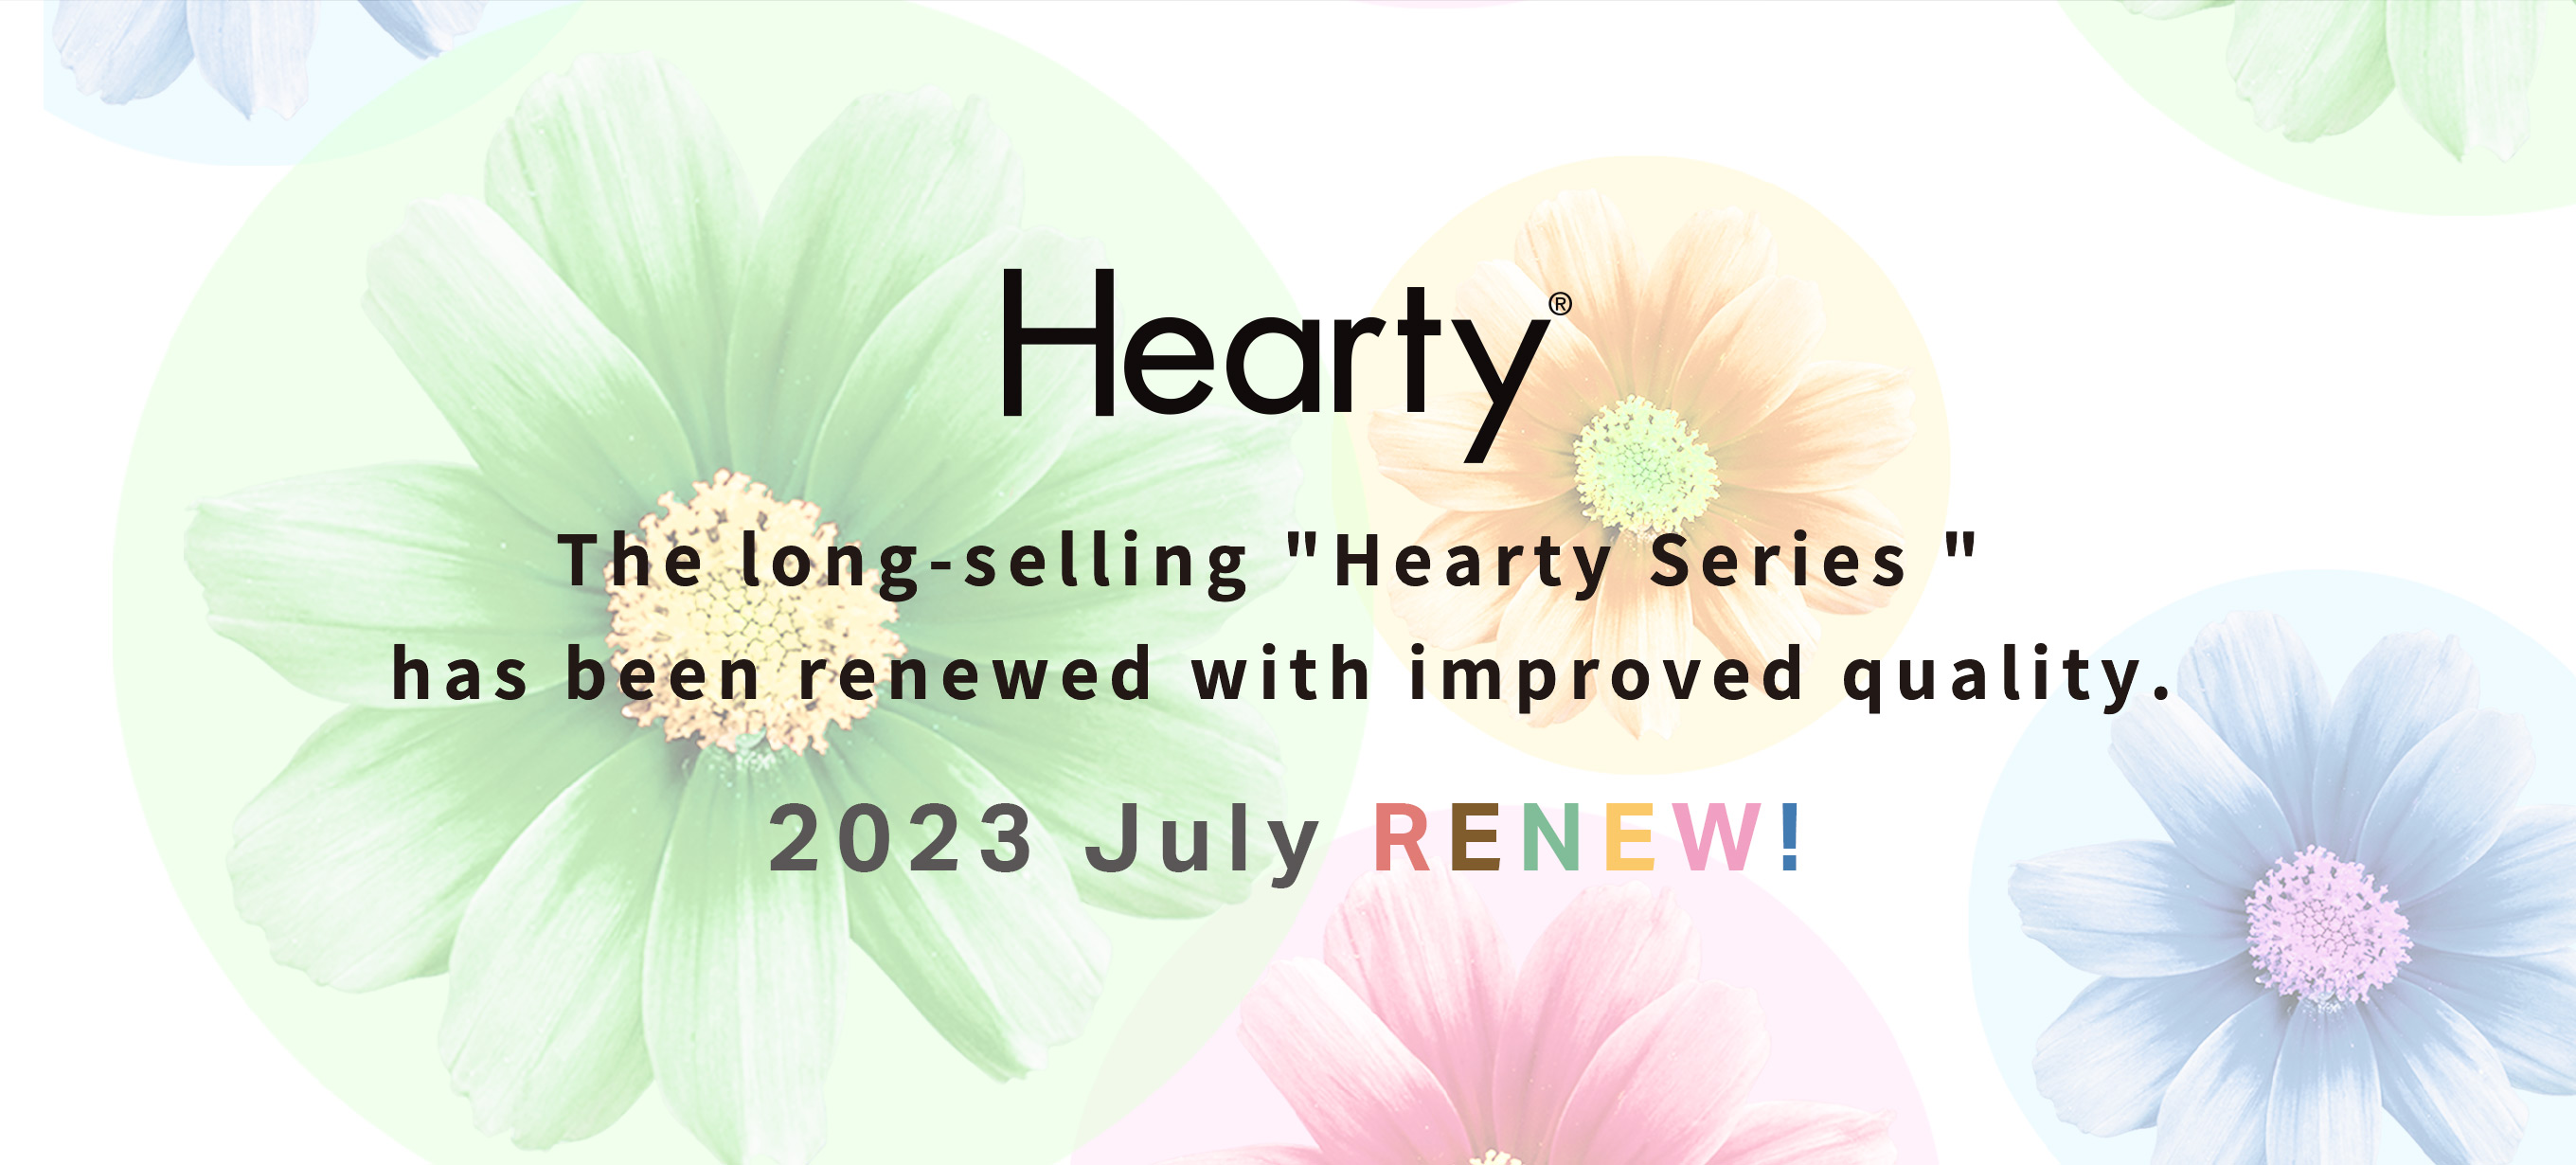 The long-selling Hearty Series has been renewed with improved quality. 2023 July RENEW!